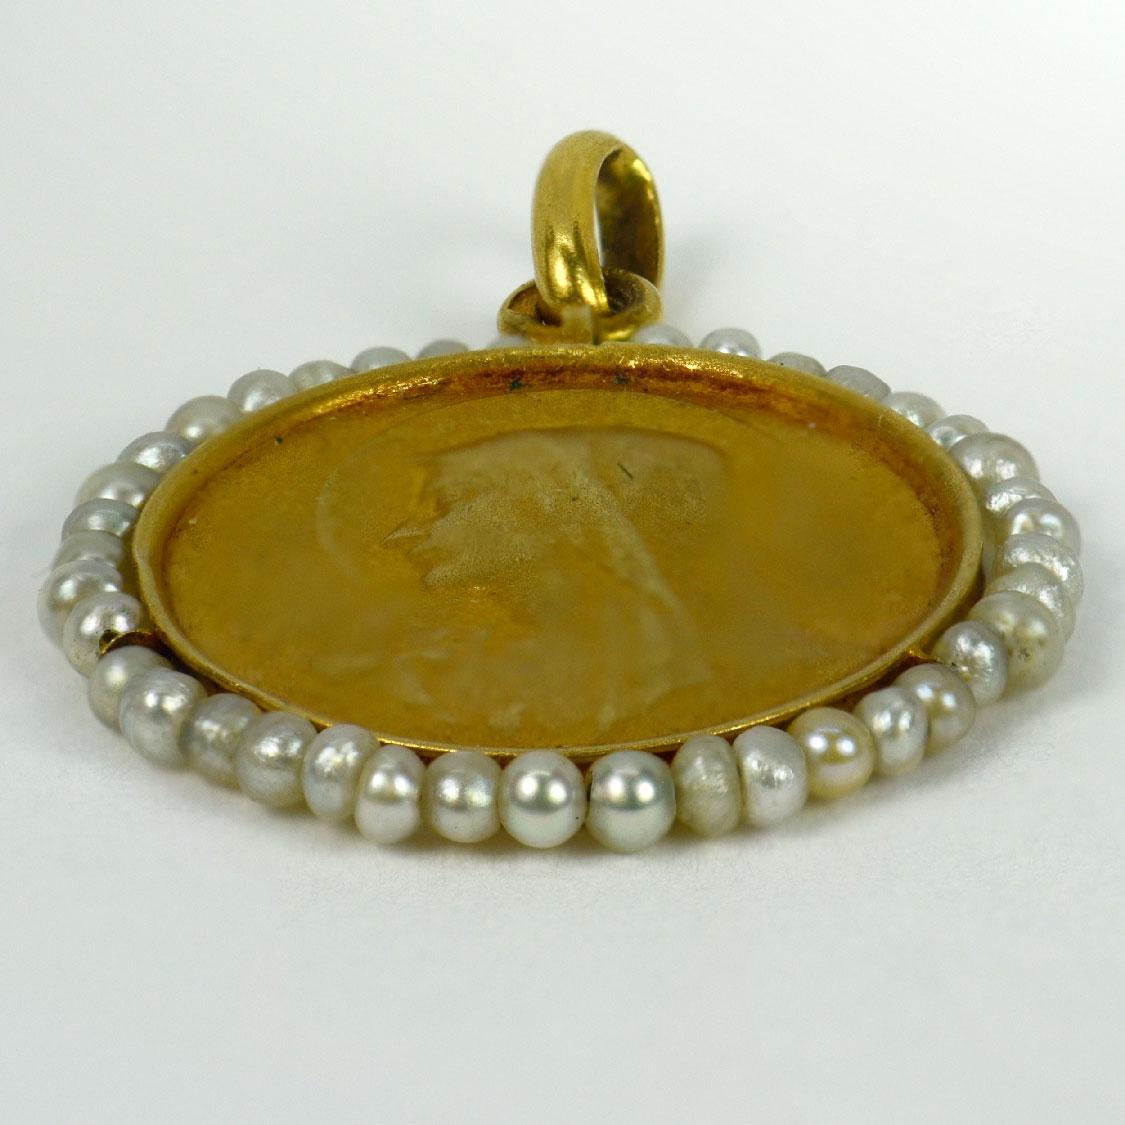 A French 18 karat (18K) yellow gold charm pendant designed as a disc representing the Virgin Mary with a lily to one side, and the holy dove to the other, surrounded by 39 natural white seed pearls. Signed Becker, stamped with the eagles head for